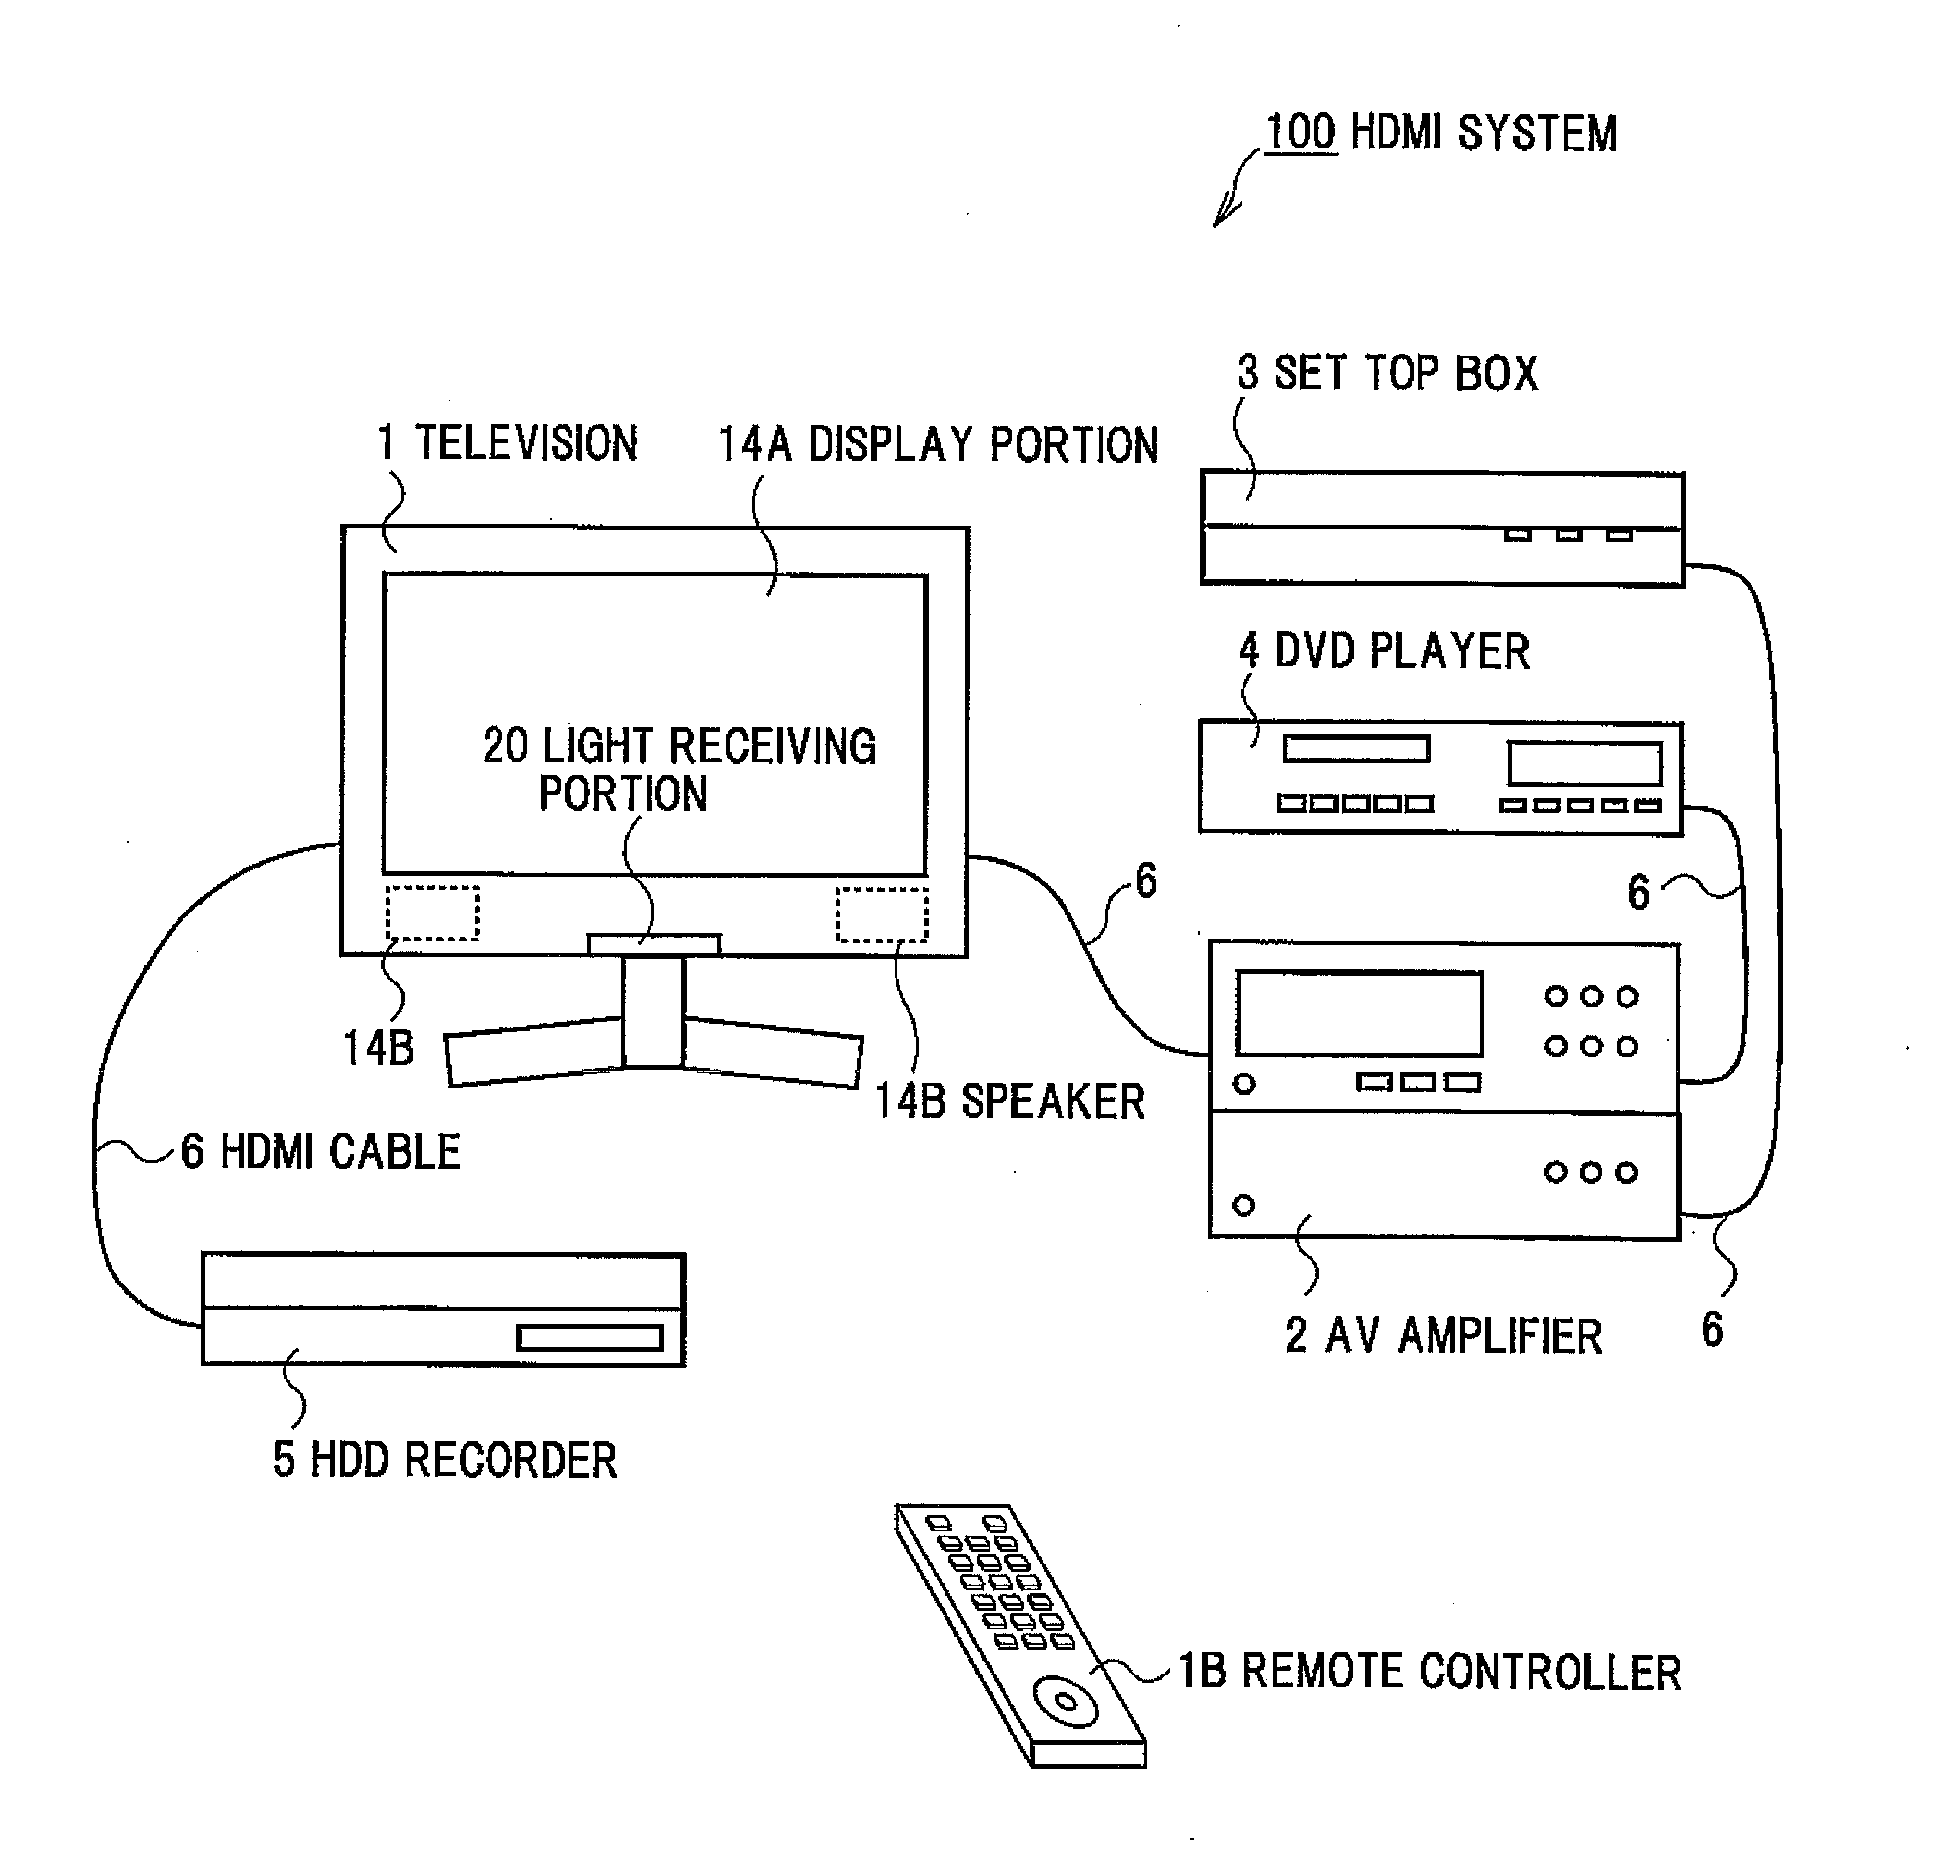 Electronic apparatus and connected apparatus searching method